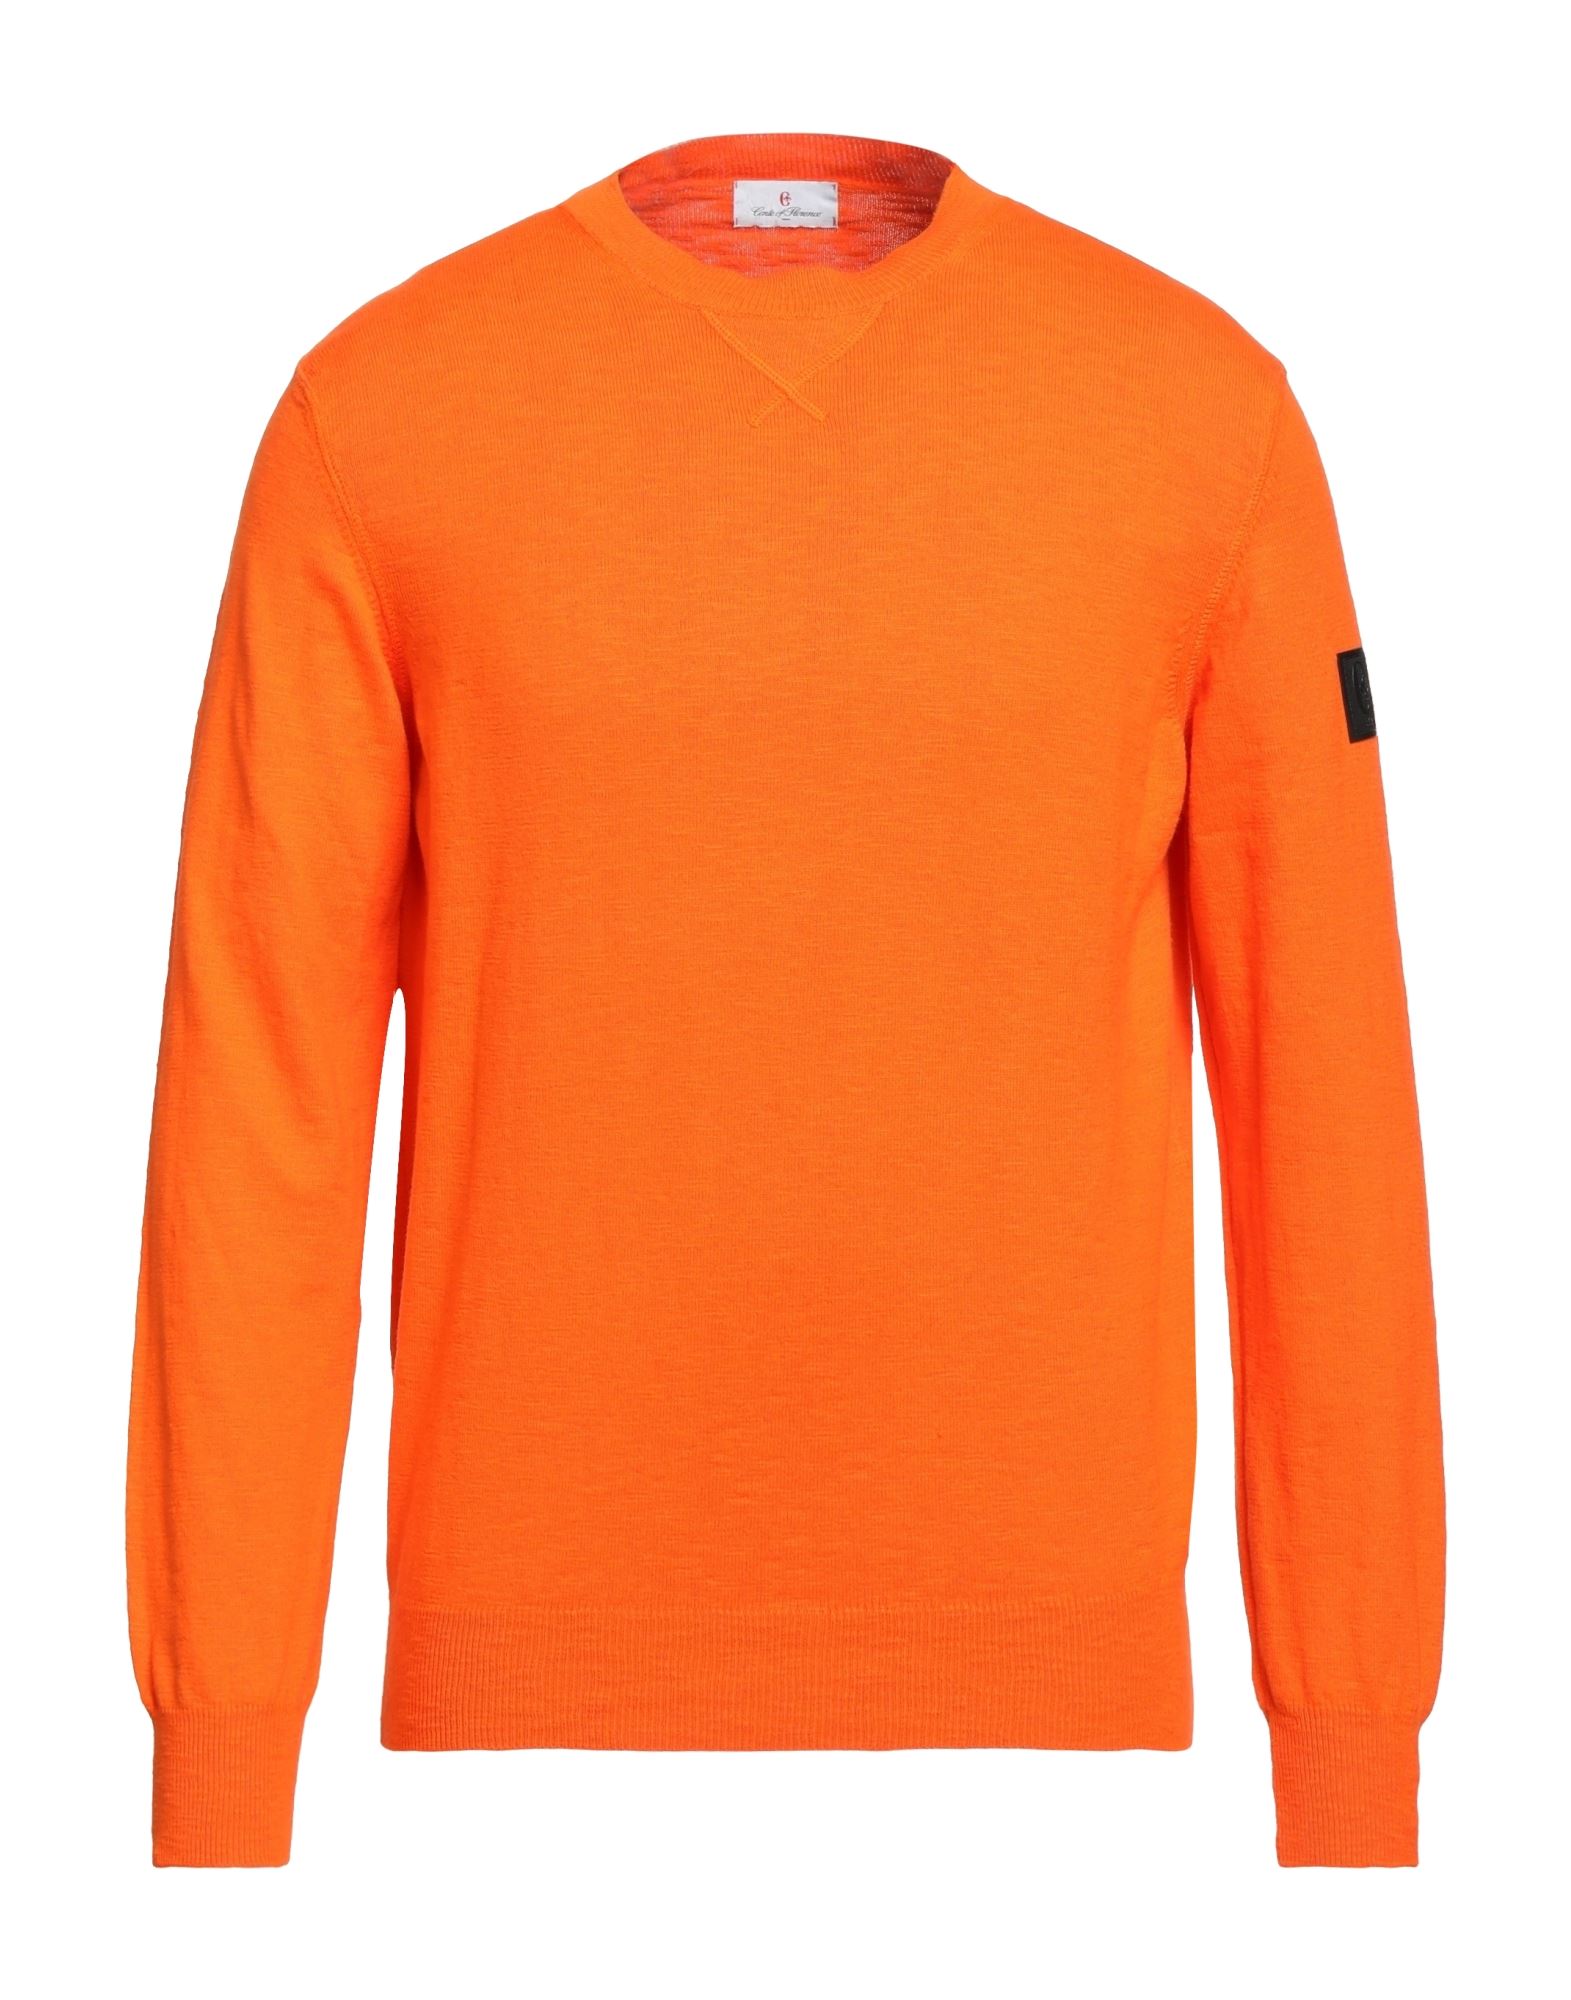 CONTE OF FLORENCE CONTE OF FLORENCE MAN SWEATER ORANGE SIZE XXL COTTON